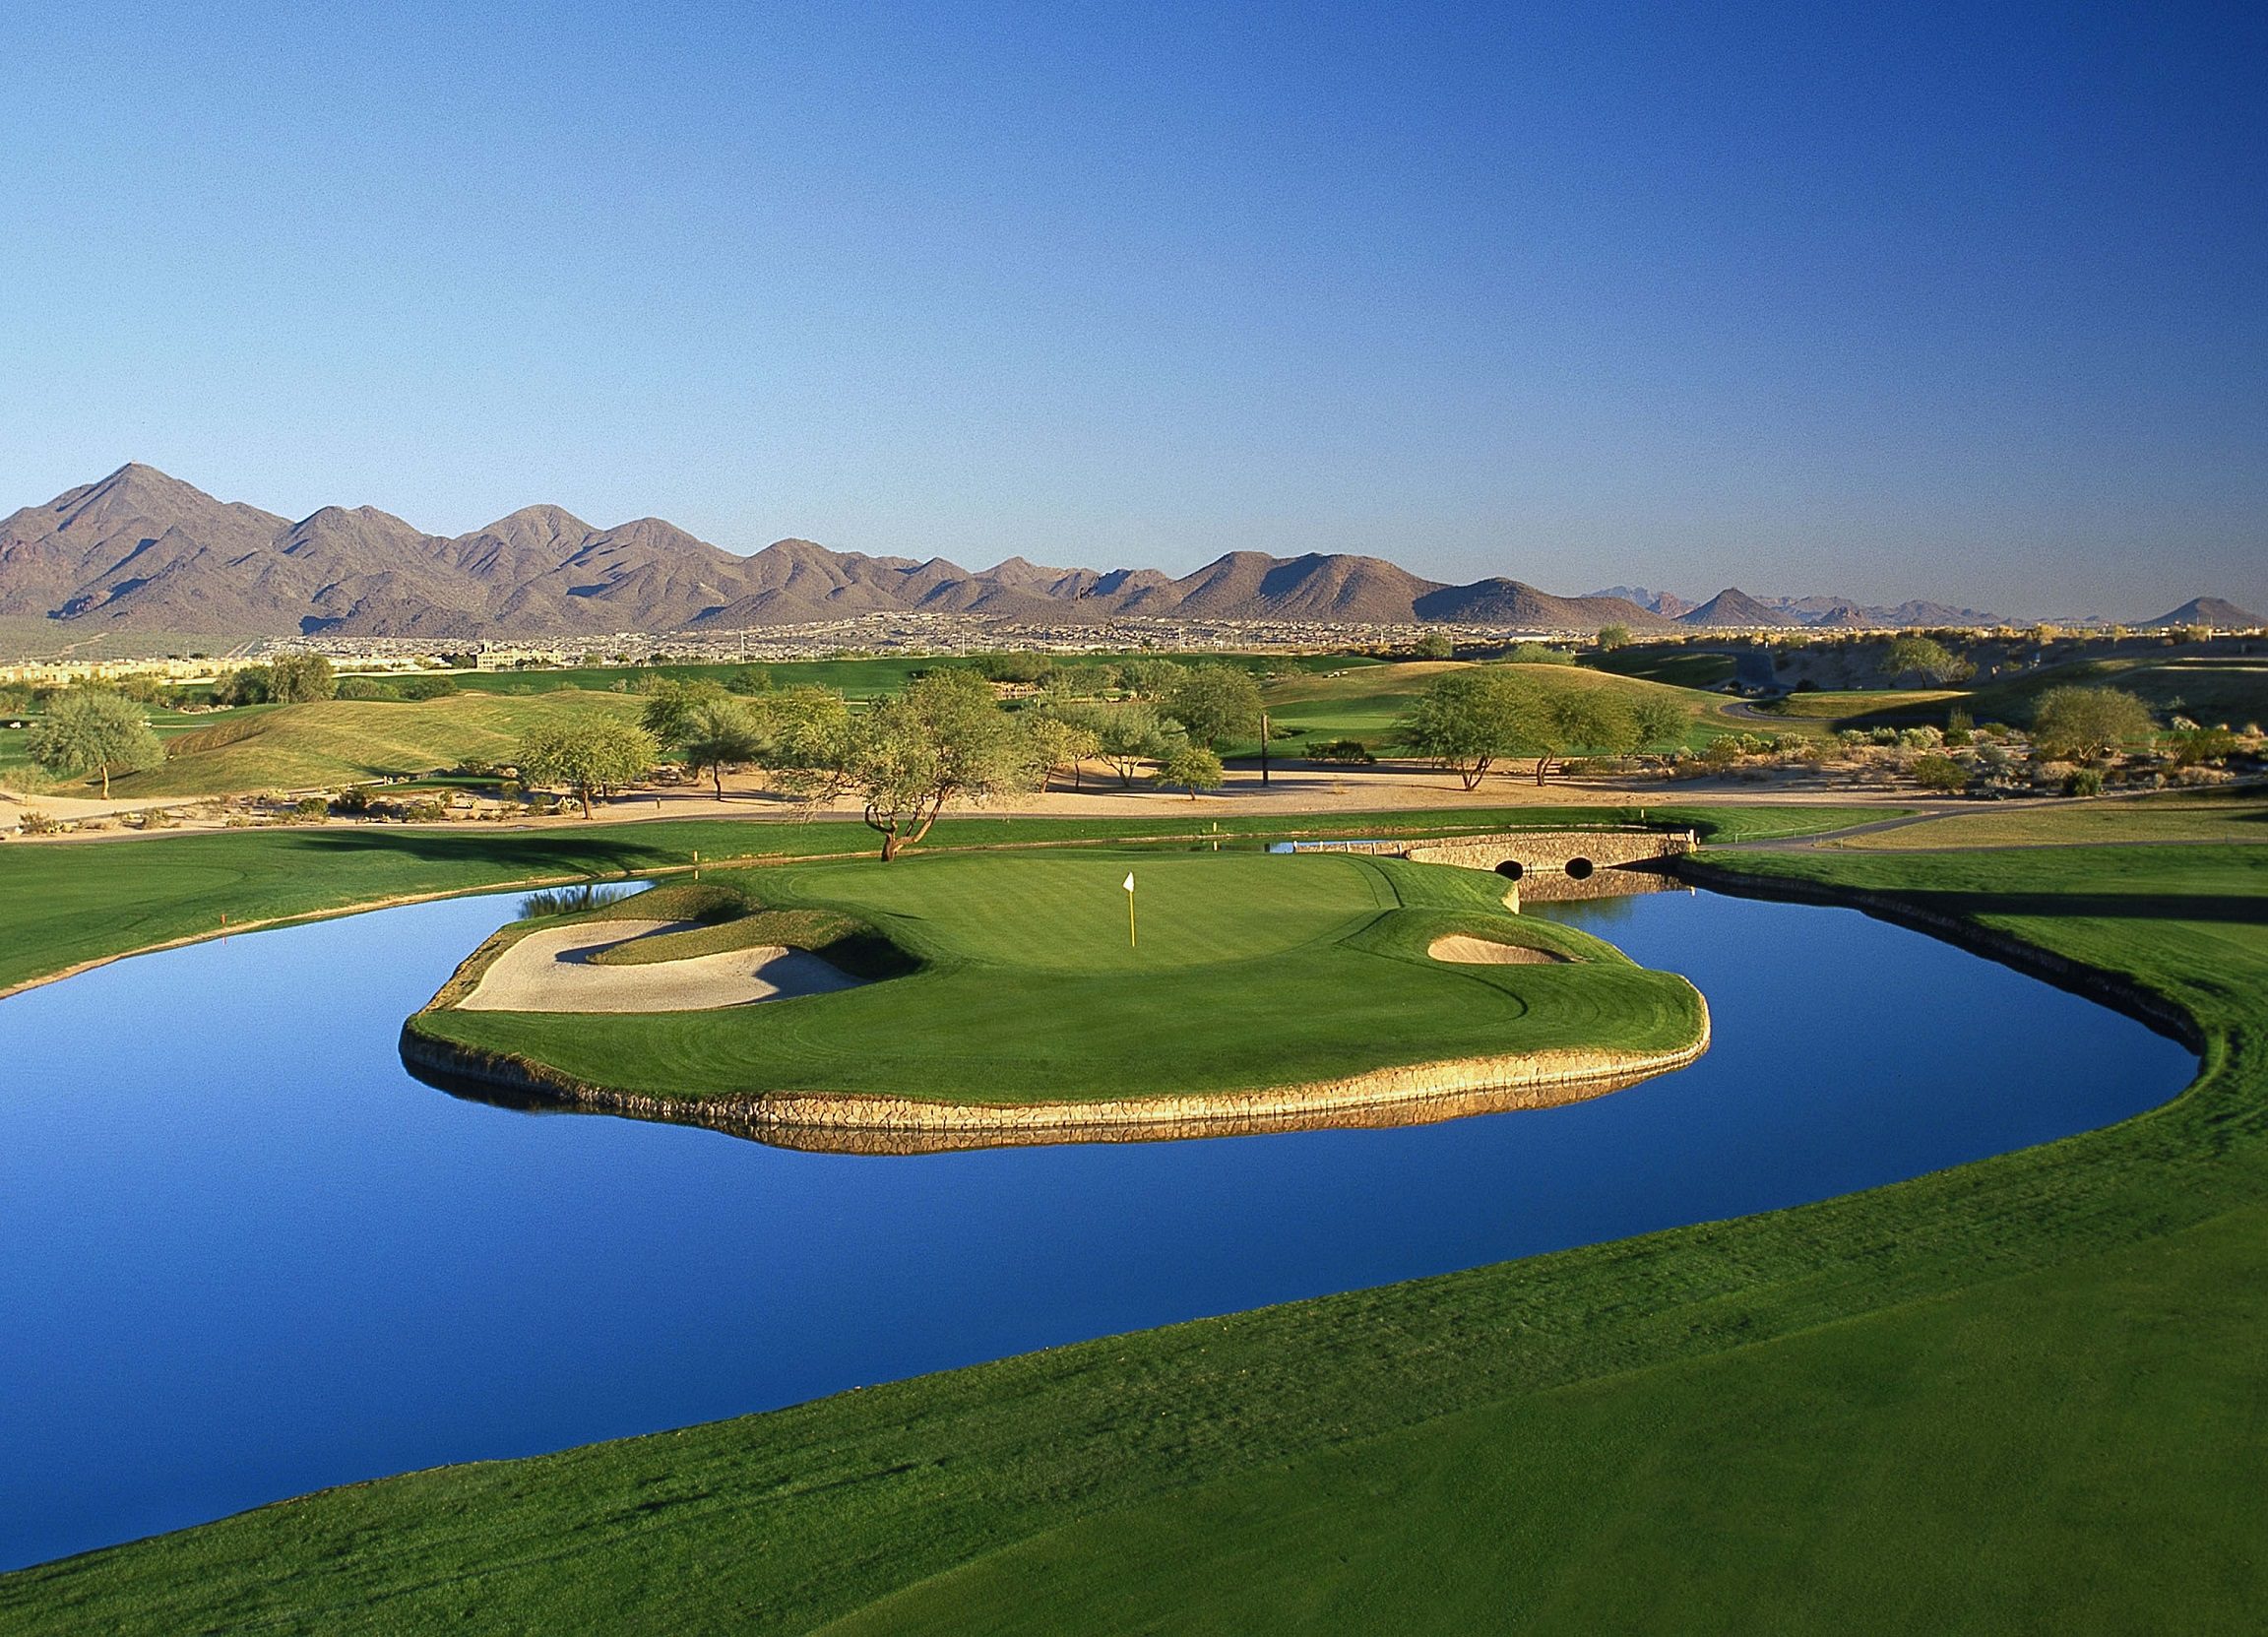 arial view of lush golf course in desert, with mountain in background